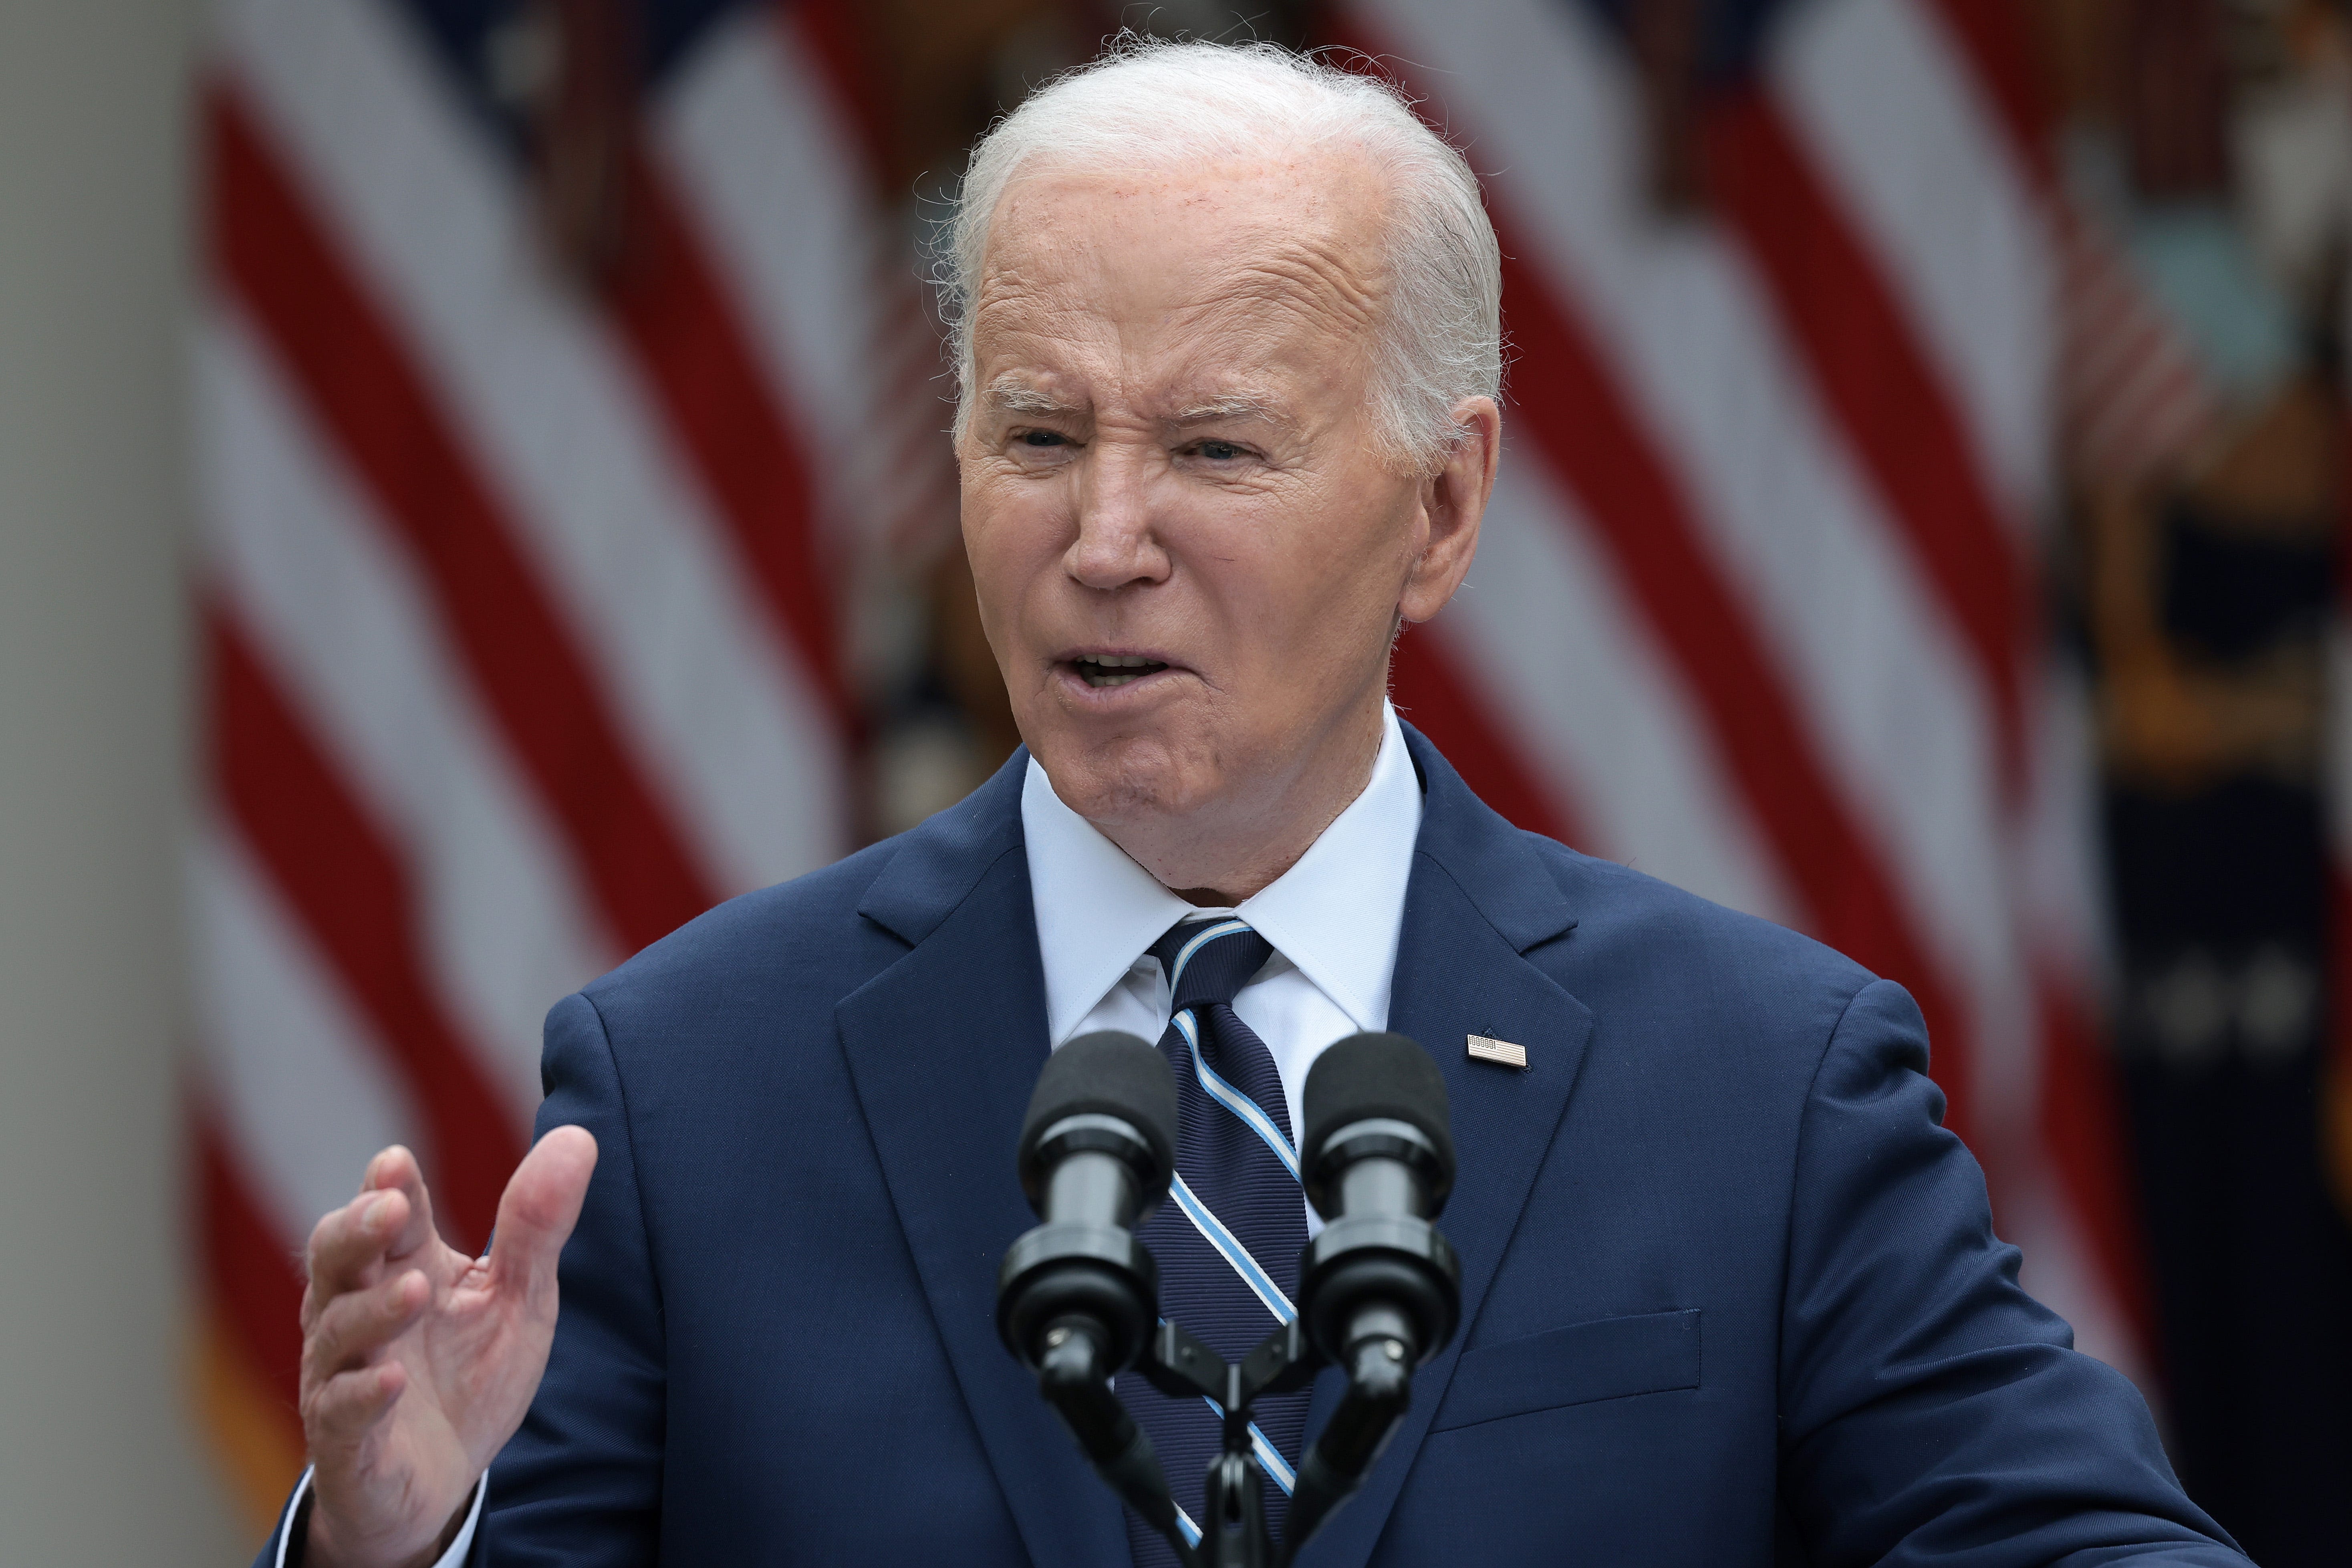 Are you worried about the high prices we're paying. Biden’s tariffs will make it worse.